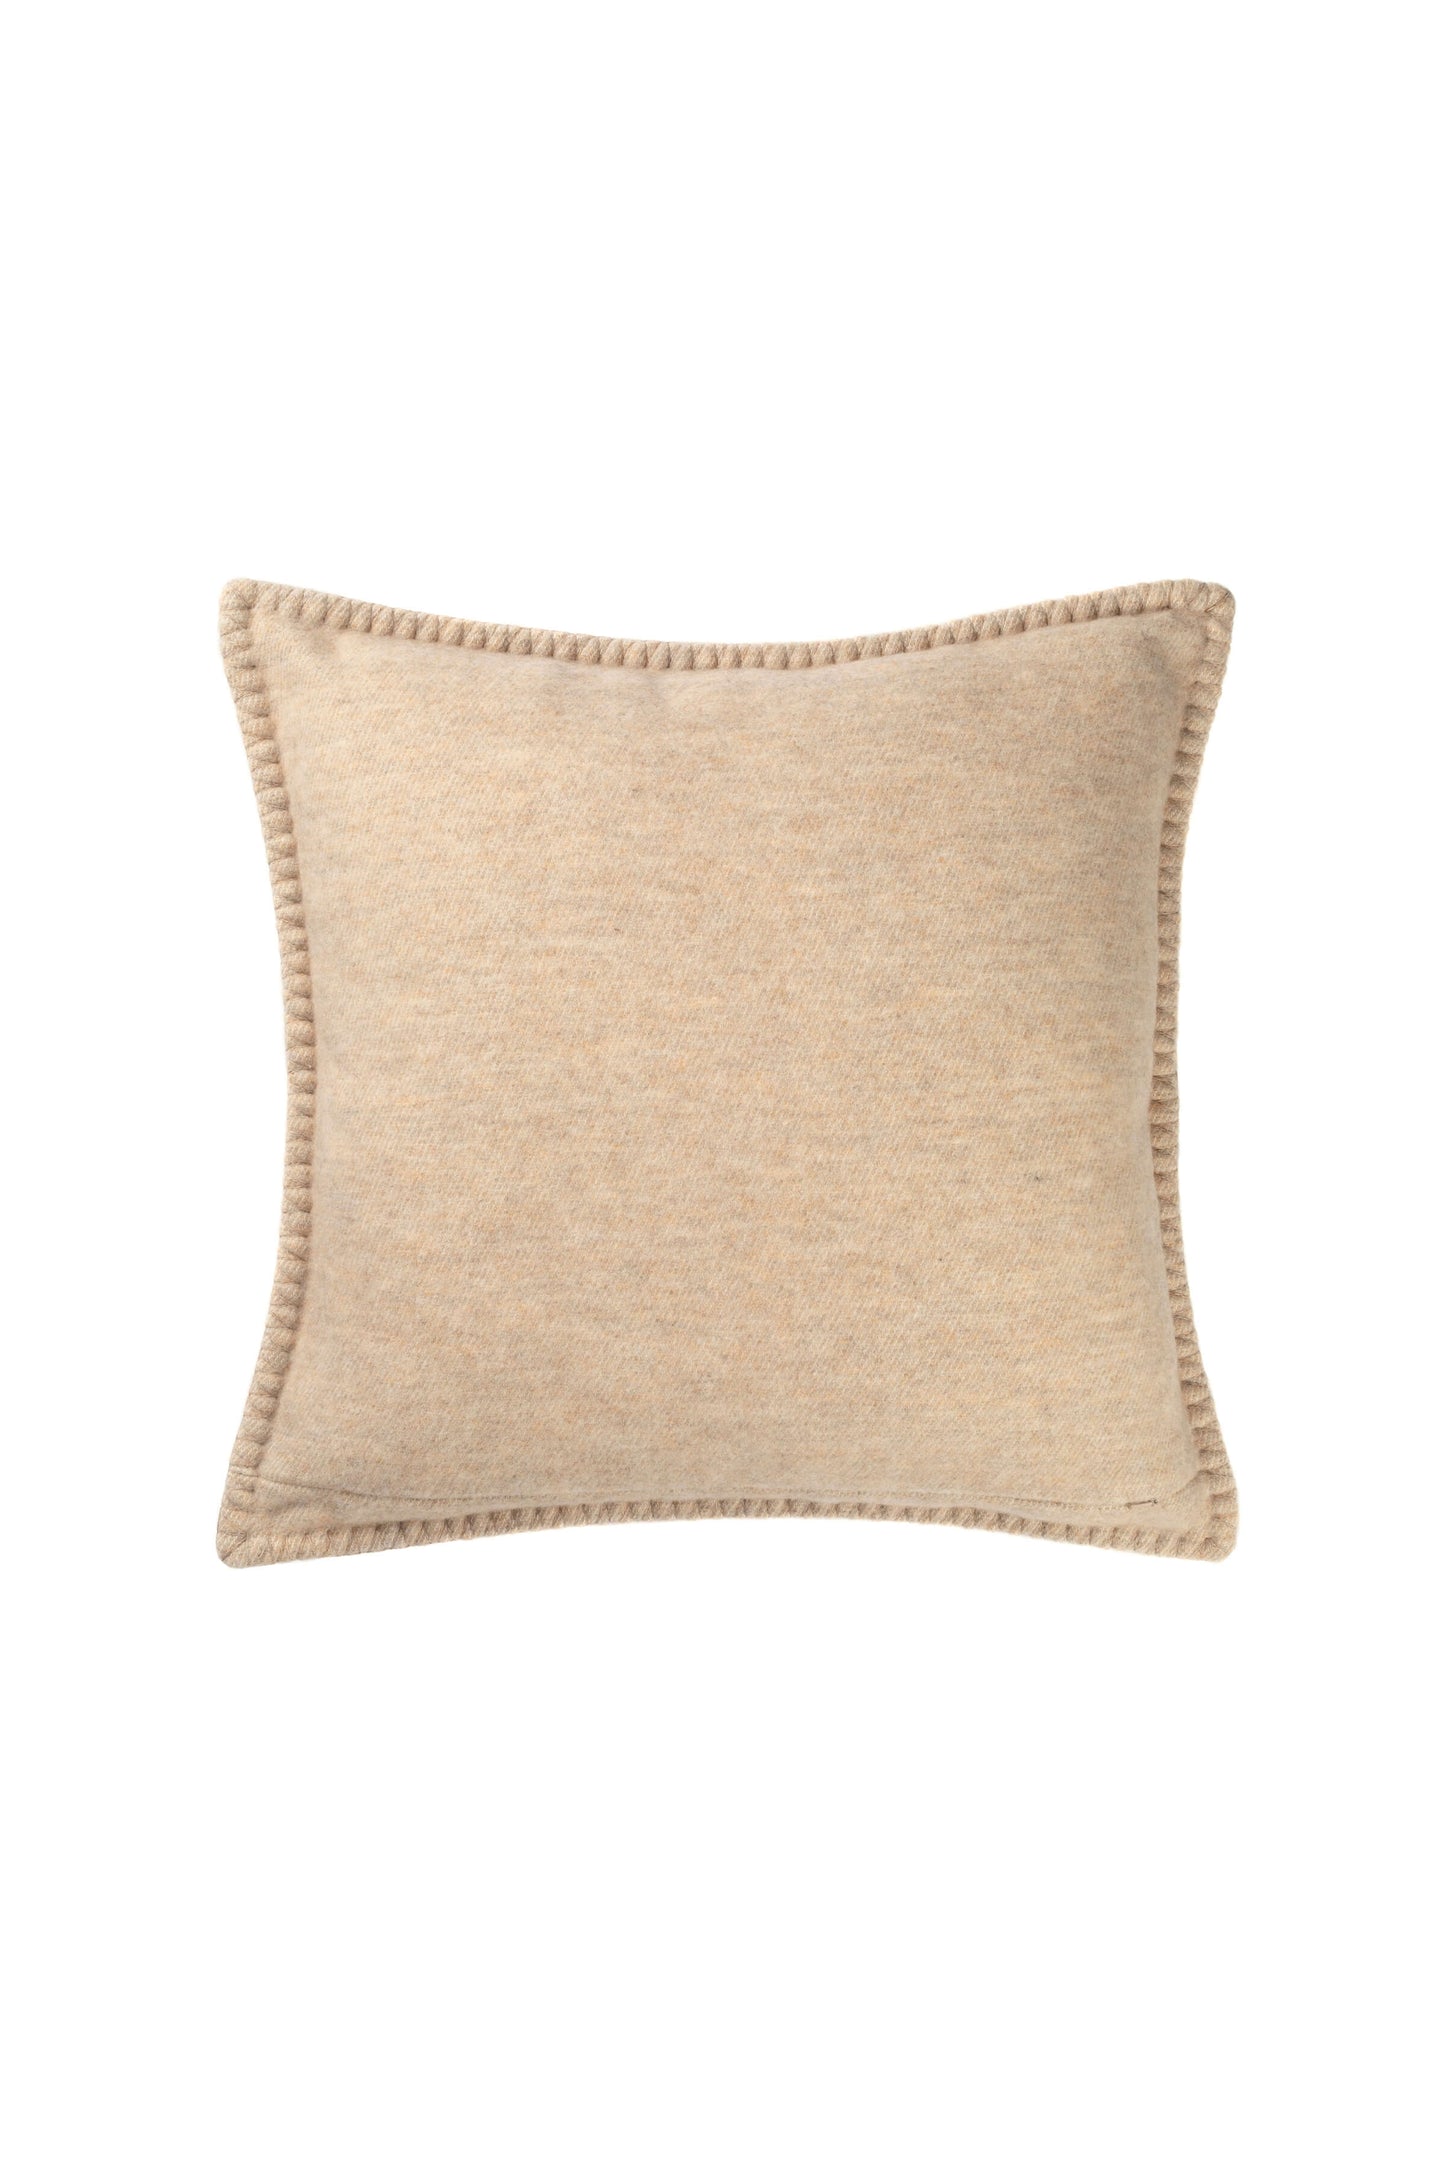 Johnstons of Elgin 2024 Home Collection Oatmeal & White Blanket Stitched Basketweave Cushion PB000059RU7447ONE